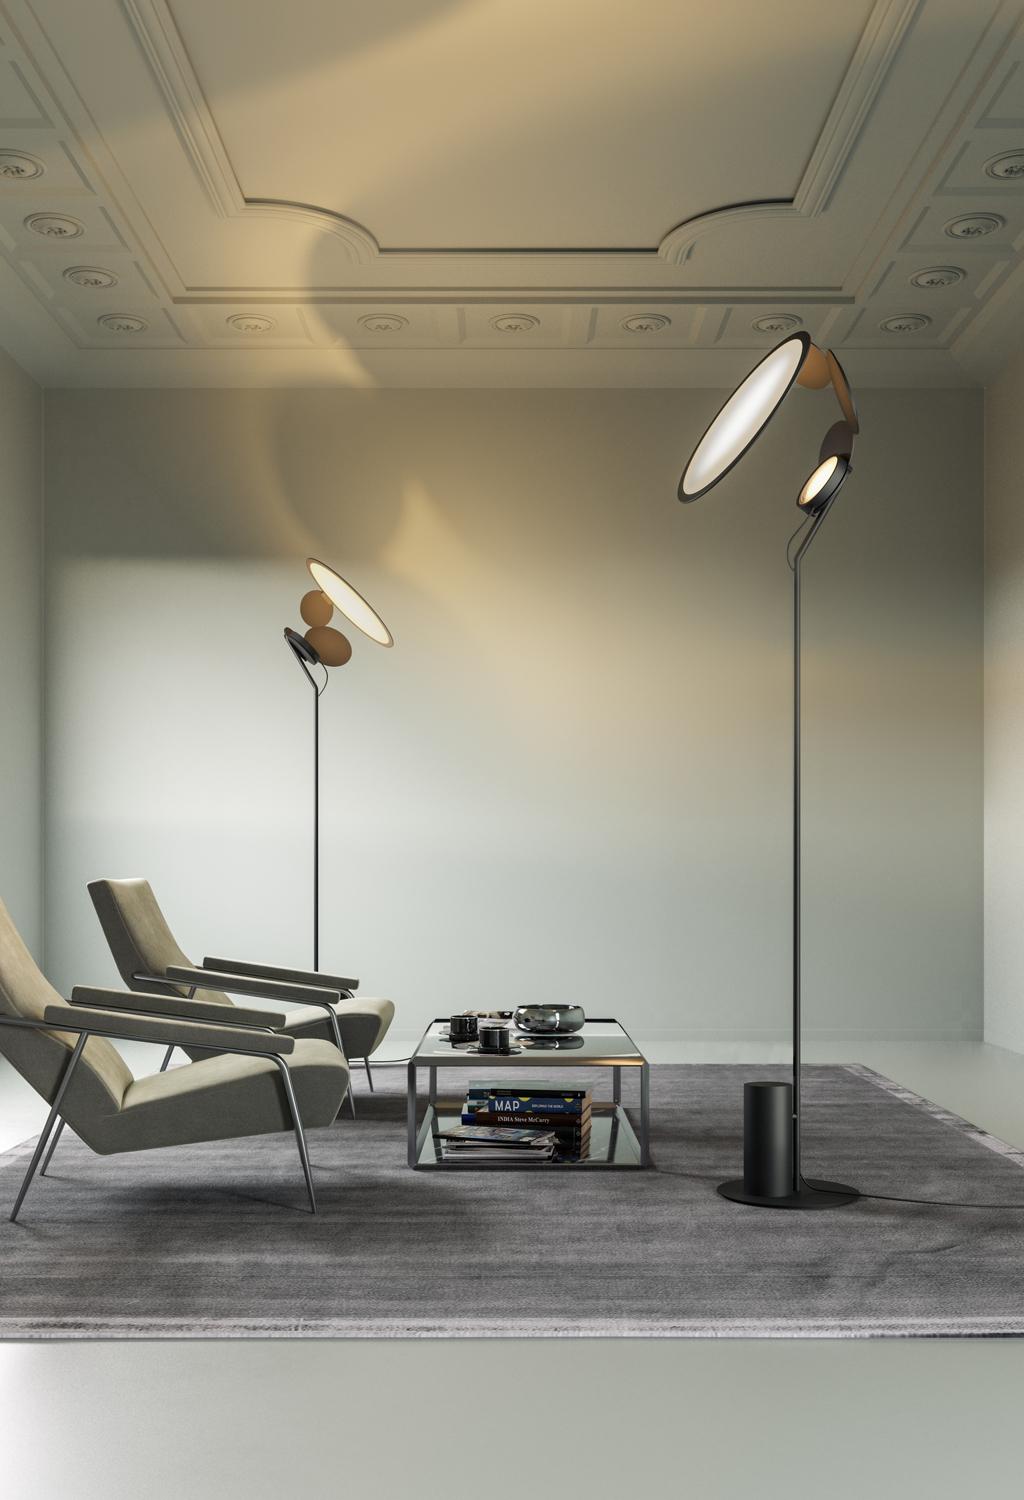 Winner of a “Gooddesign” award 2019/2020 for the Lighting category, Cut is the result of a long design process between Axolight and Timo Ripatti, aimed at the design of an adjustable lamp, that can be positioned on three points and never glares.